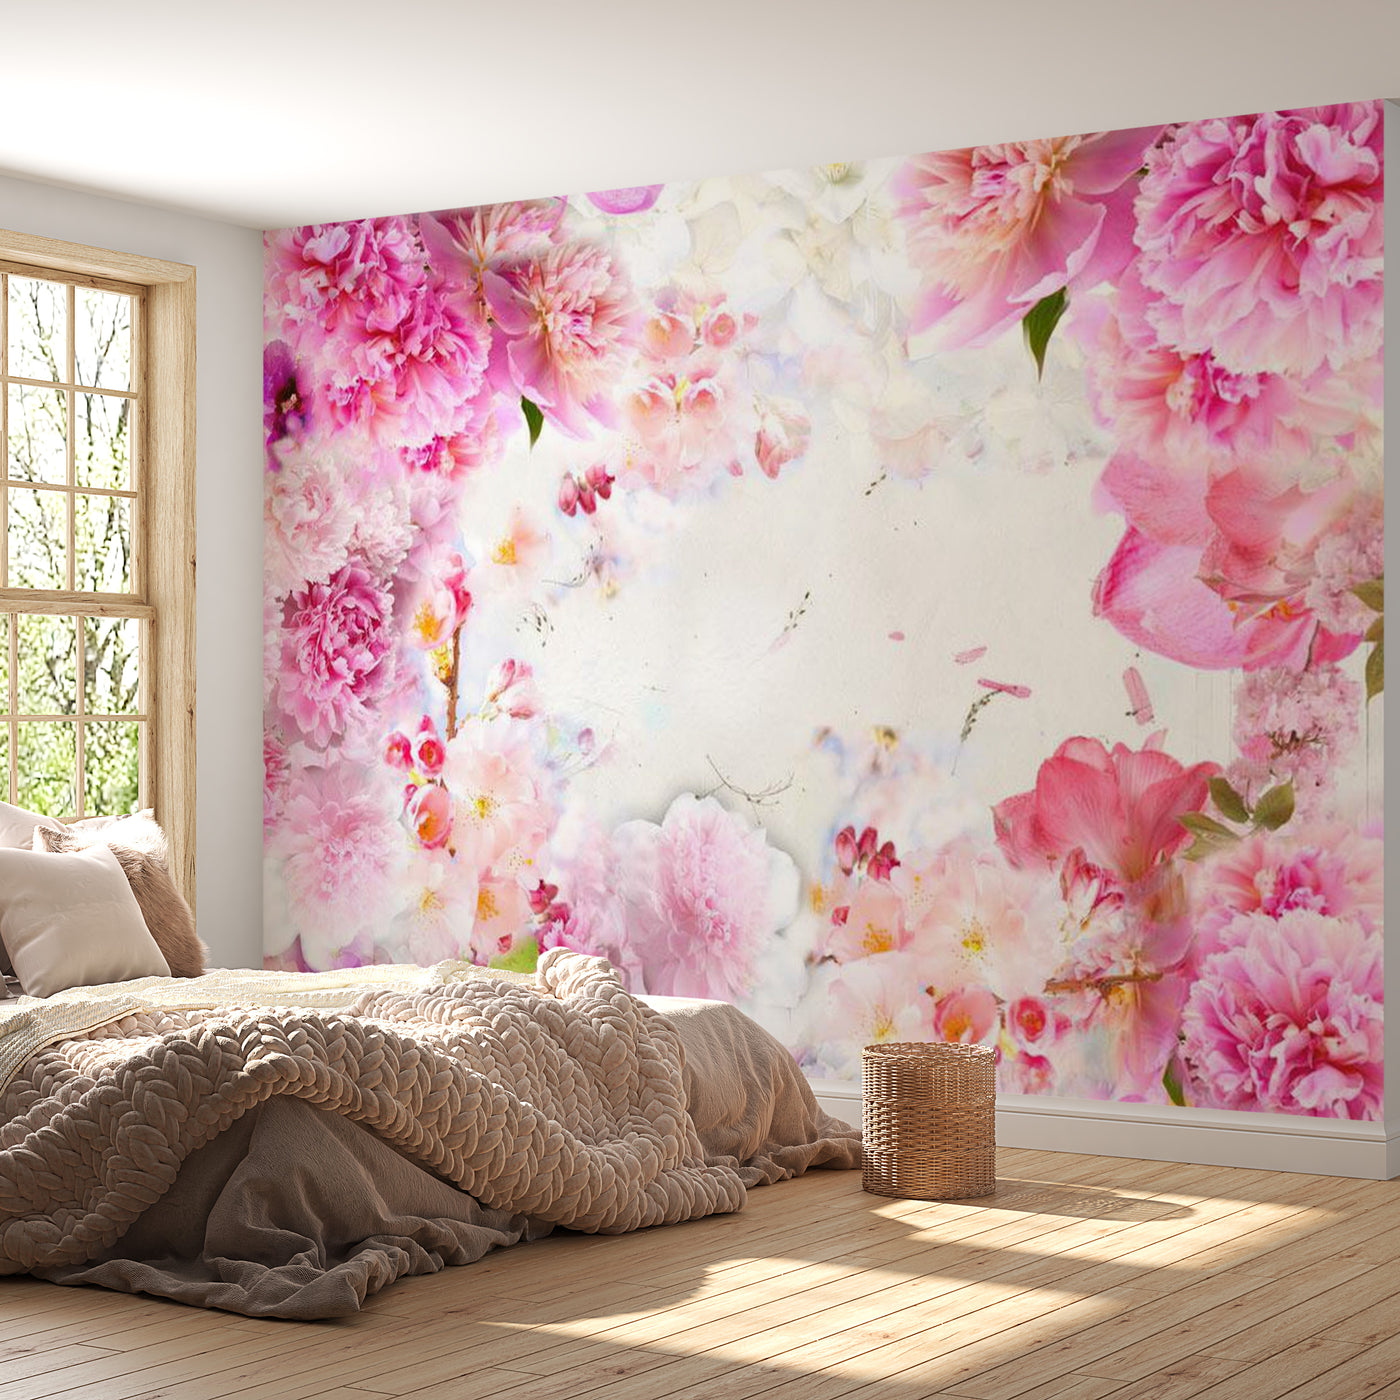 Peel & Stick Floral Wall Mural - Blooming June - Removable Wall Decals